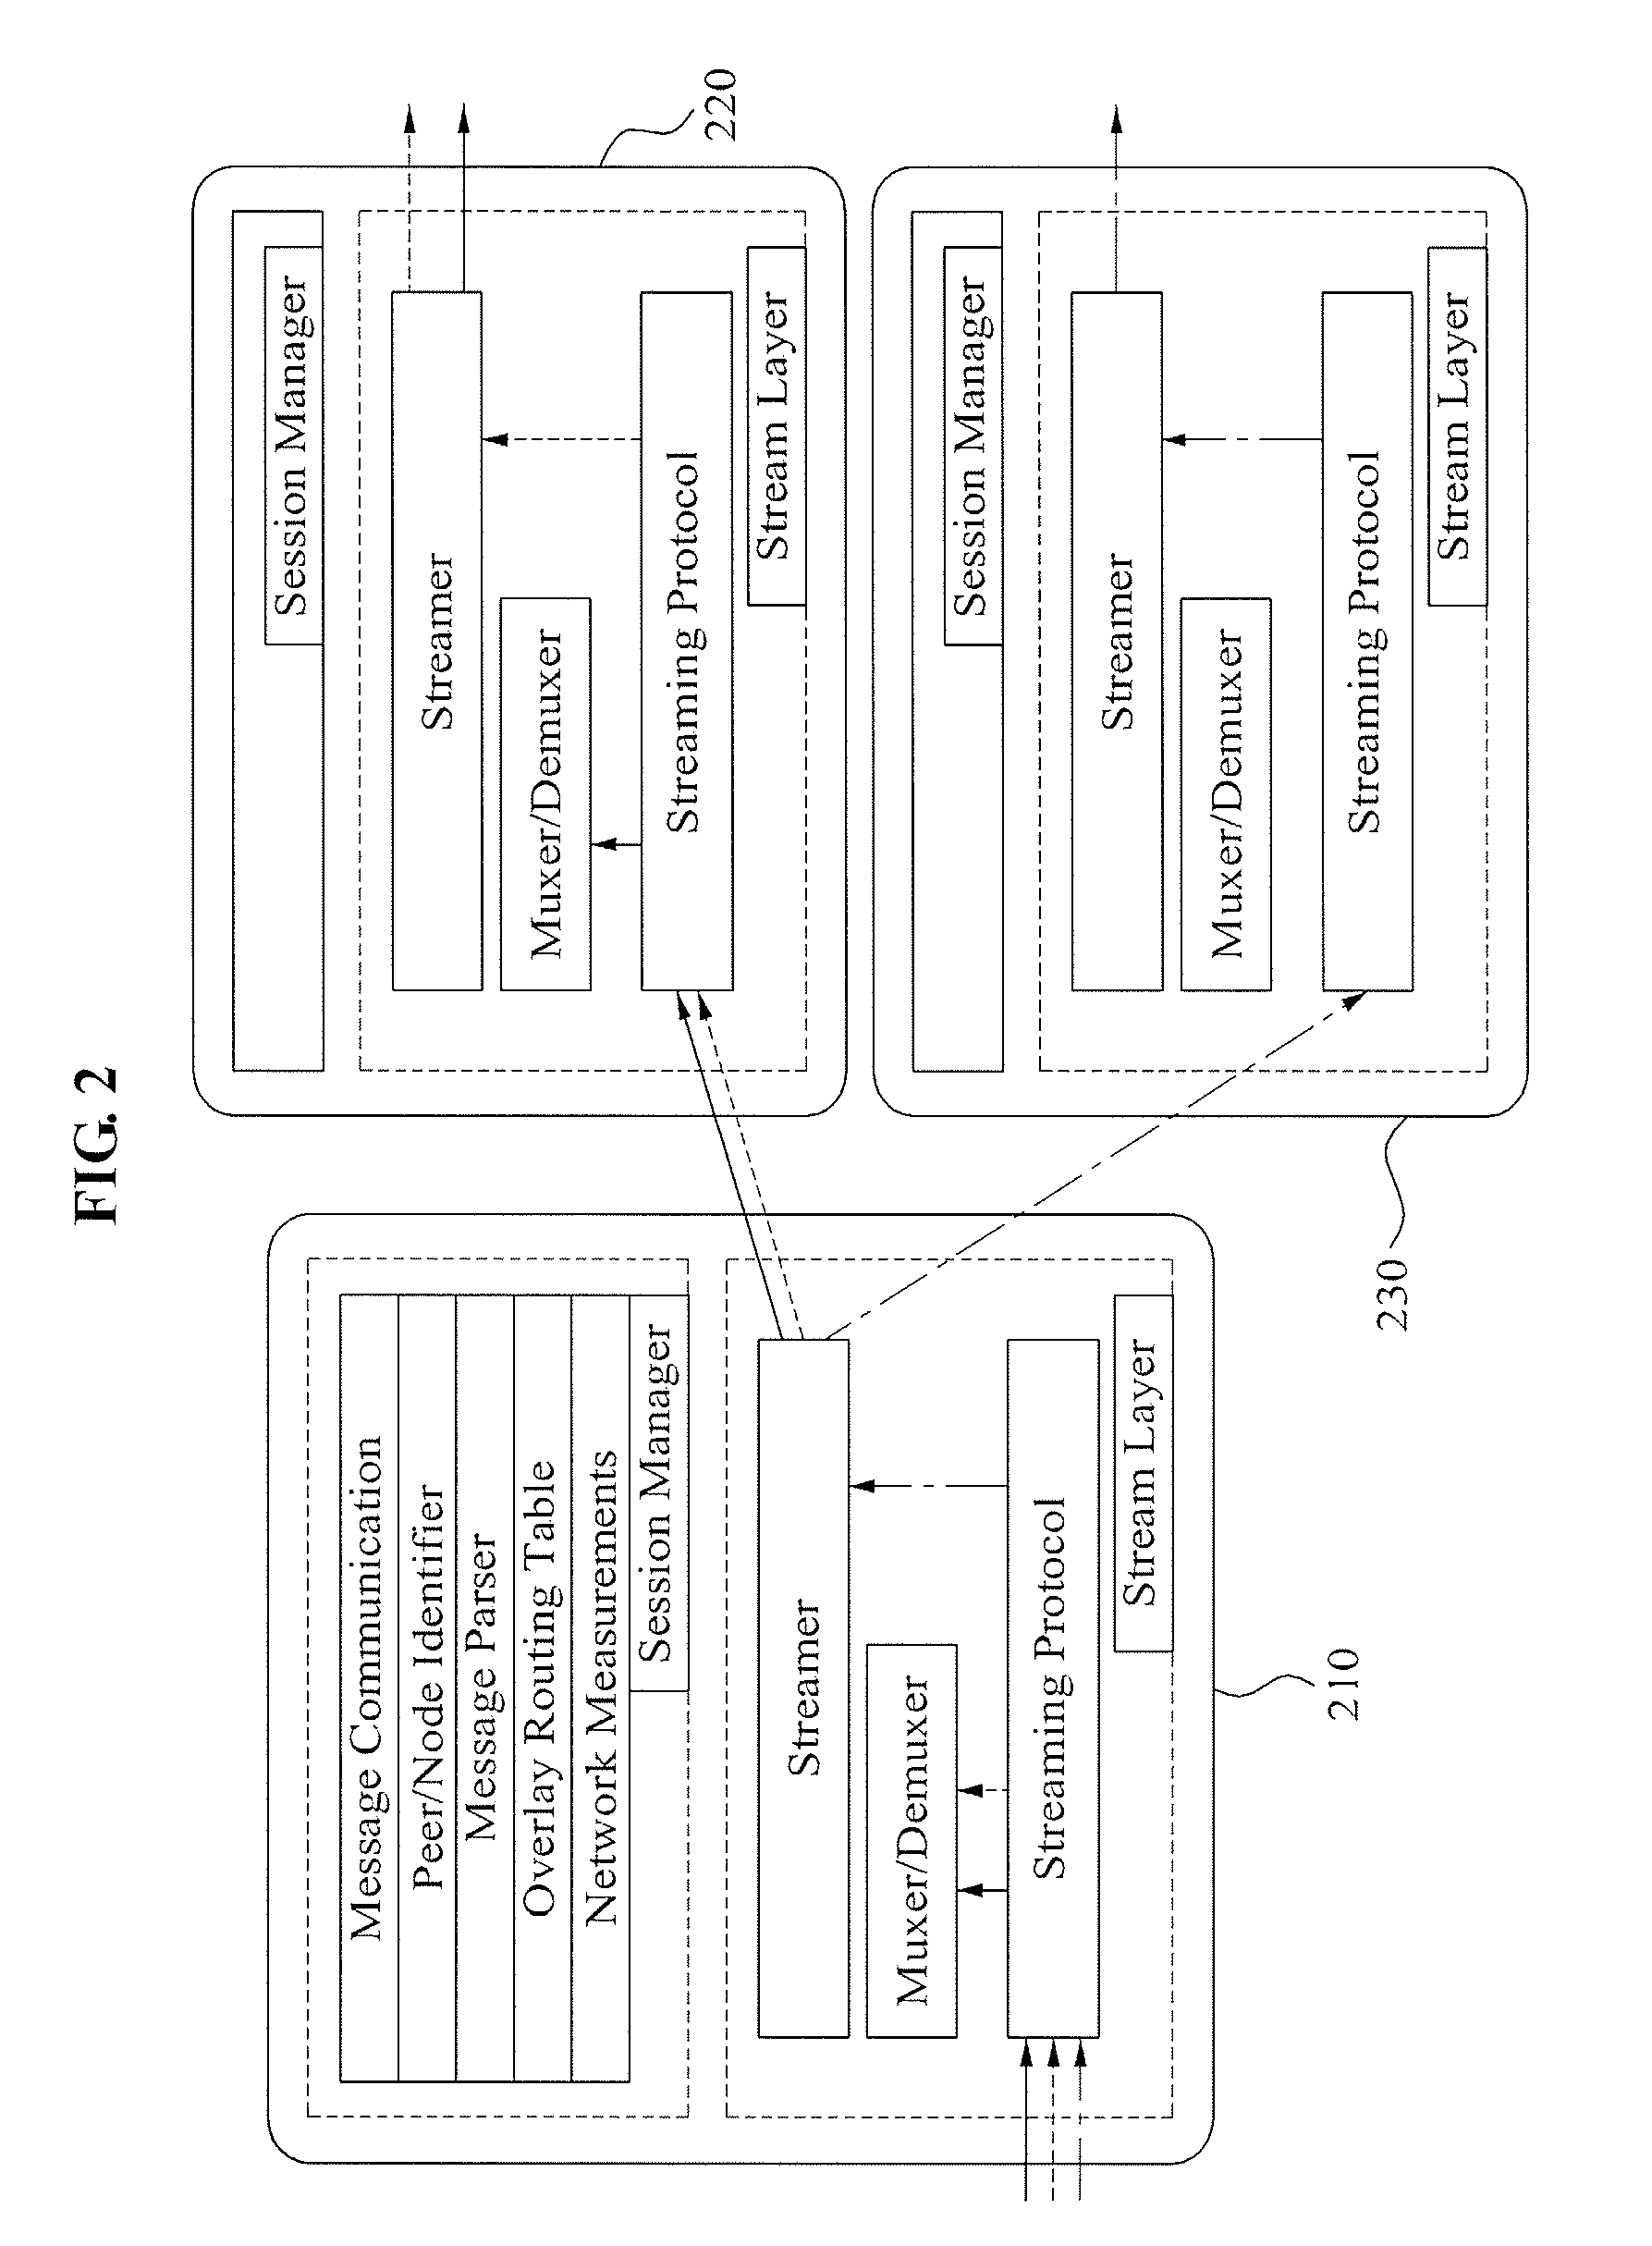 Overlay multicast system for group media transmission application service composed of multiple stream